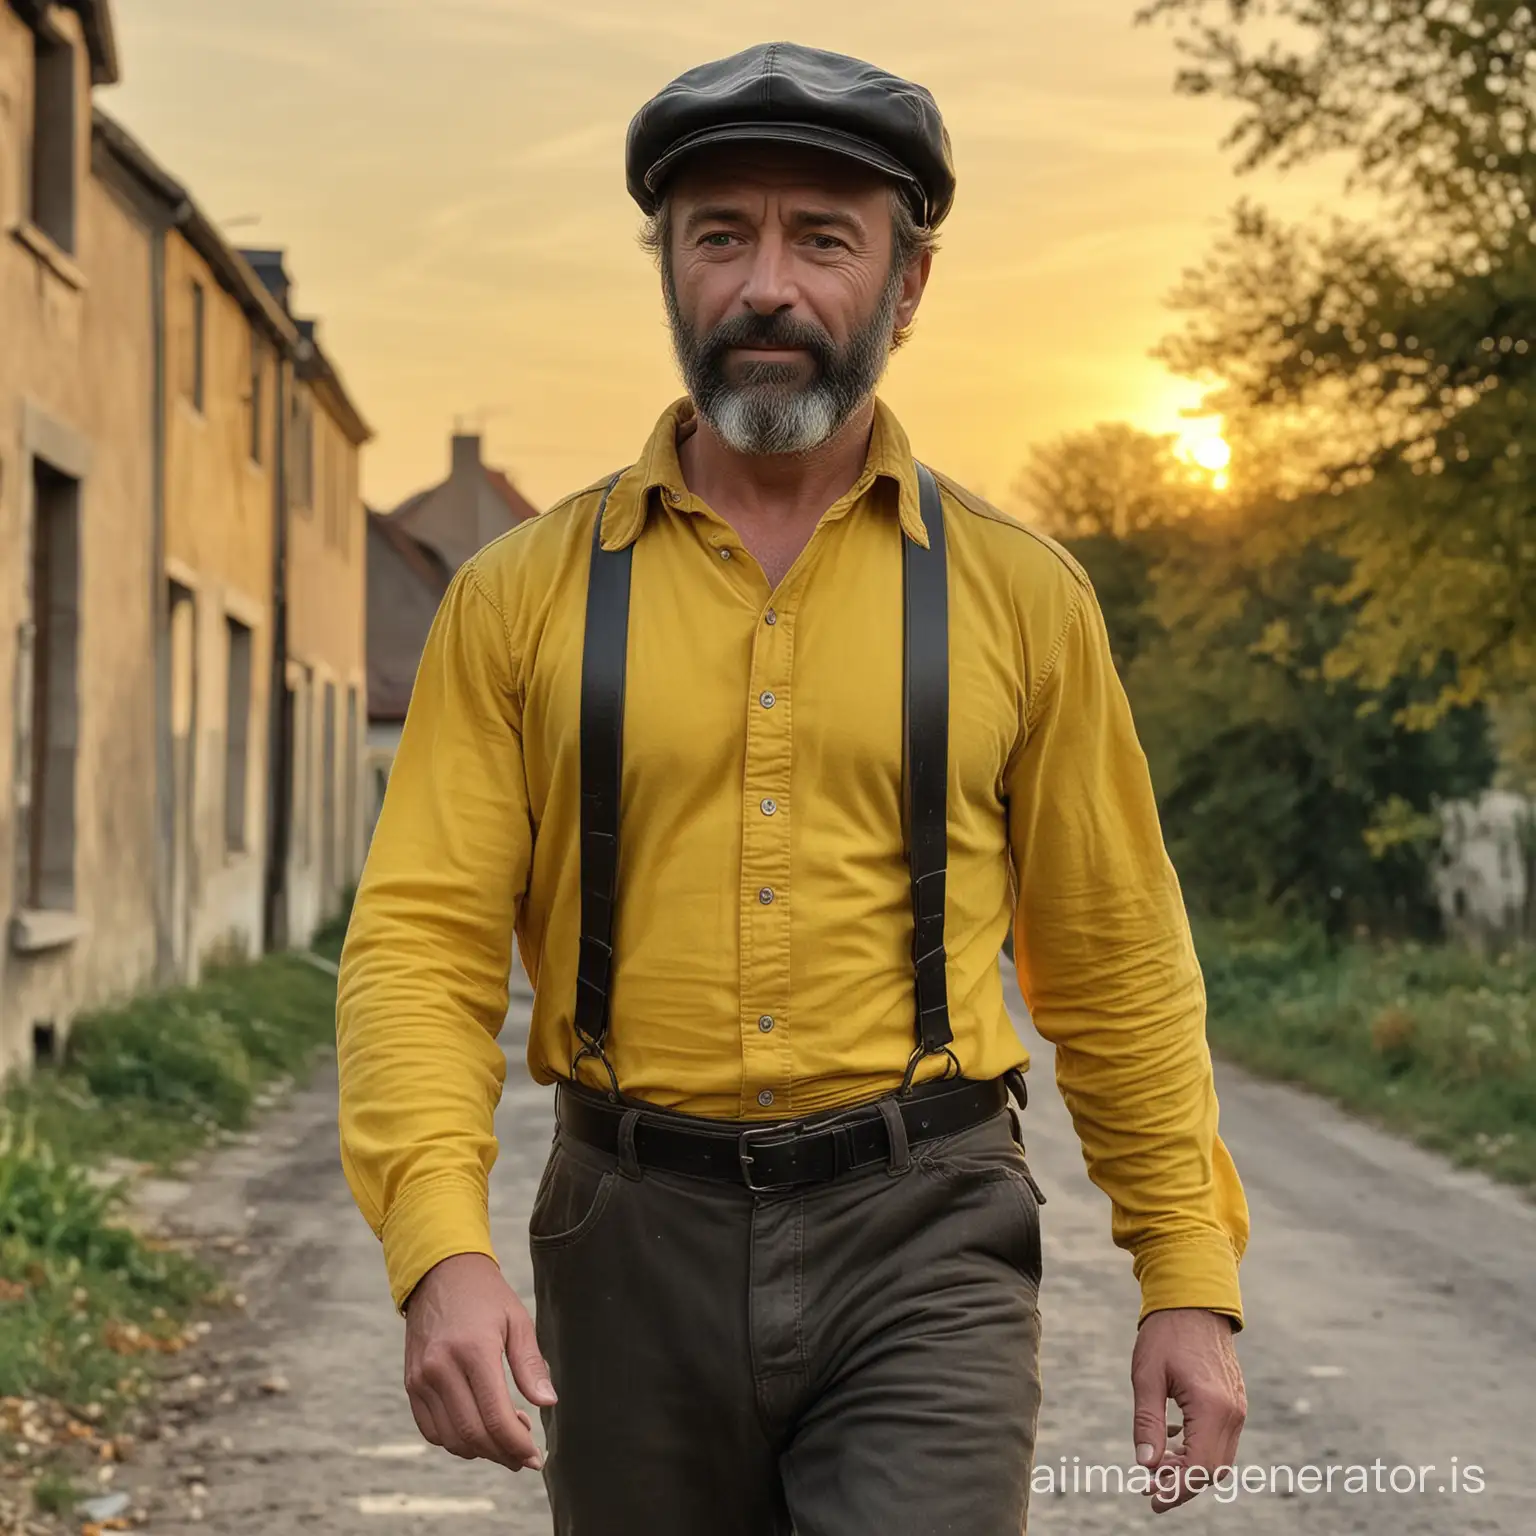 jean valjean, stout, robust, in the prime of life, wearing a coarse yellow shirt and a leather visor cap, walking at sunset in october in dignes of victor hugo